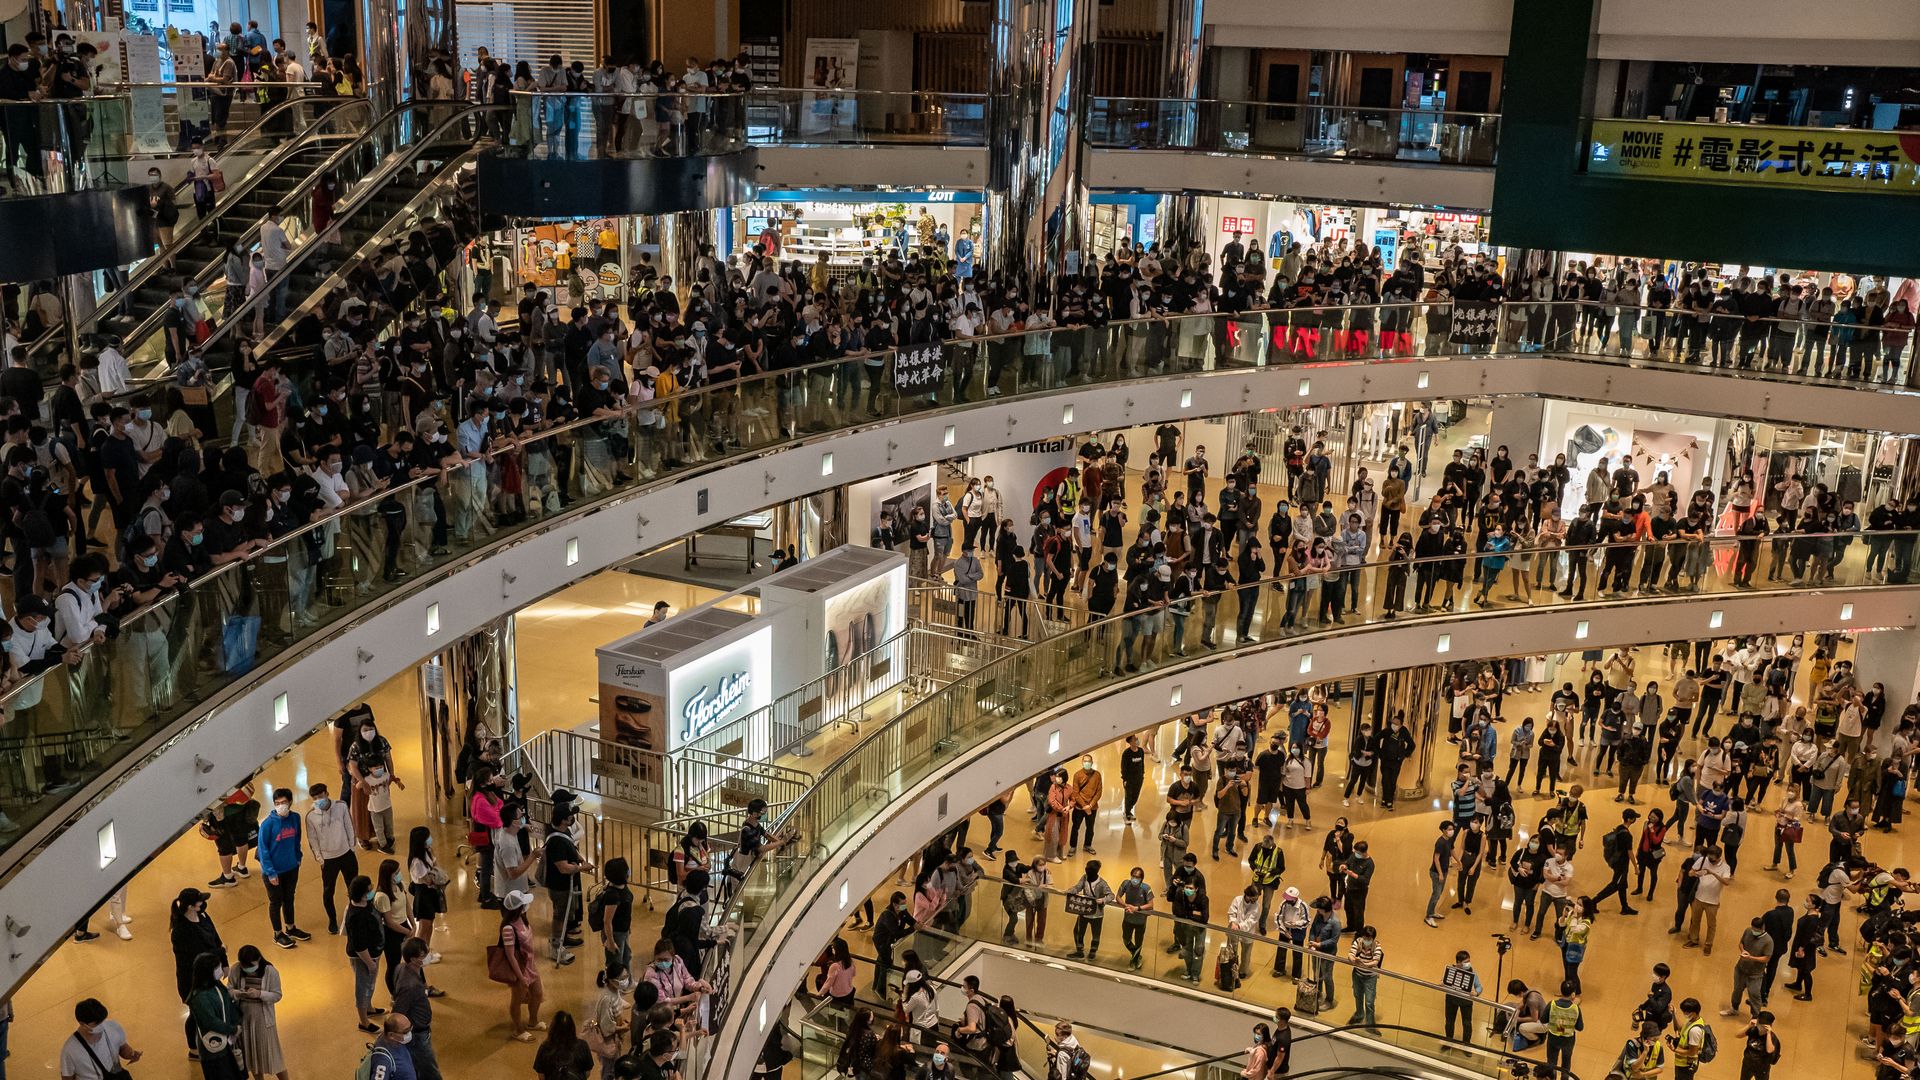 This image shows large crowds standing in a mall